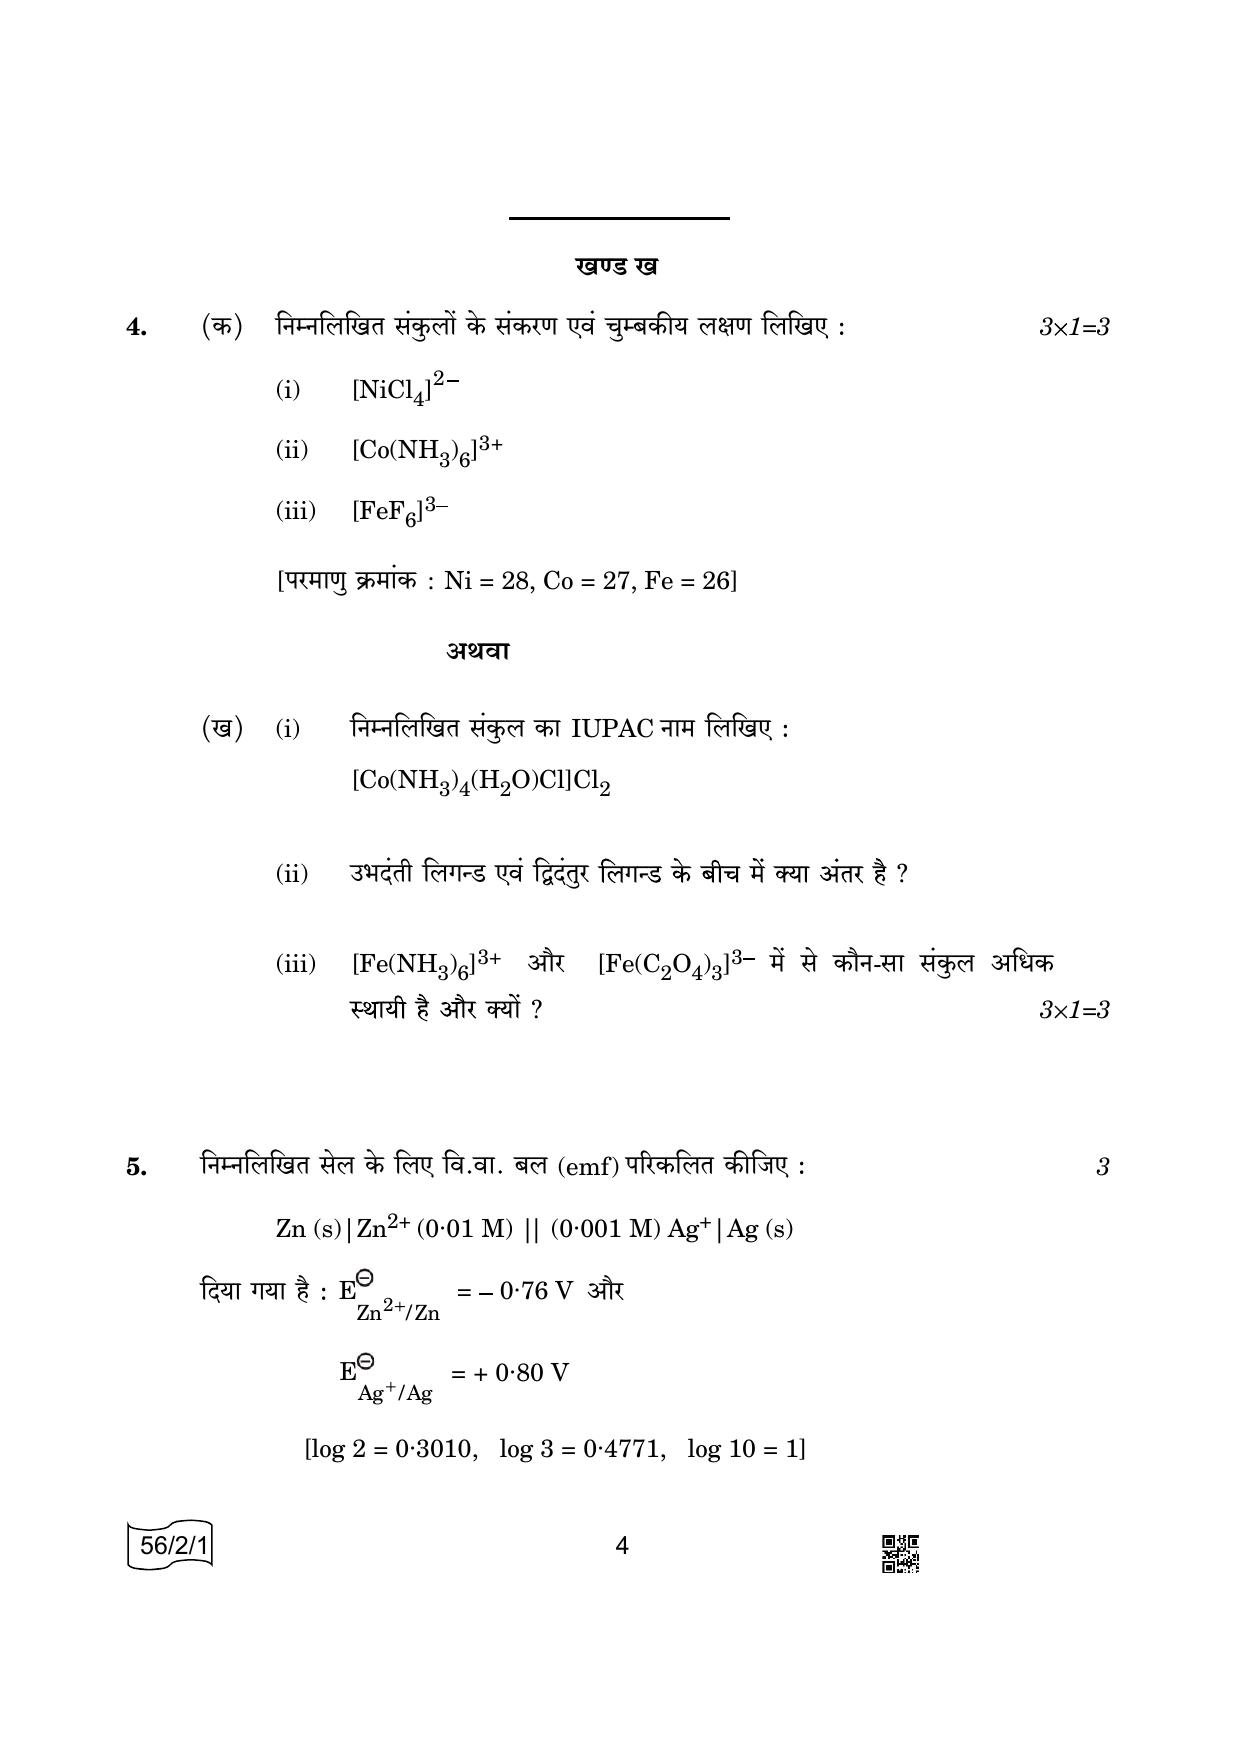 CBSE Class 12 56-2-1 Chemistry 2022 Question Paper - Page 4